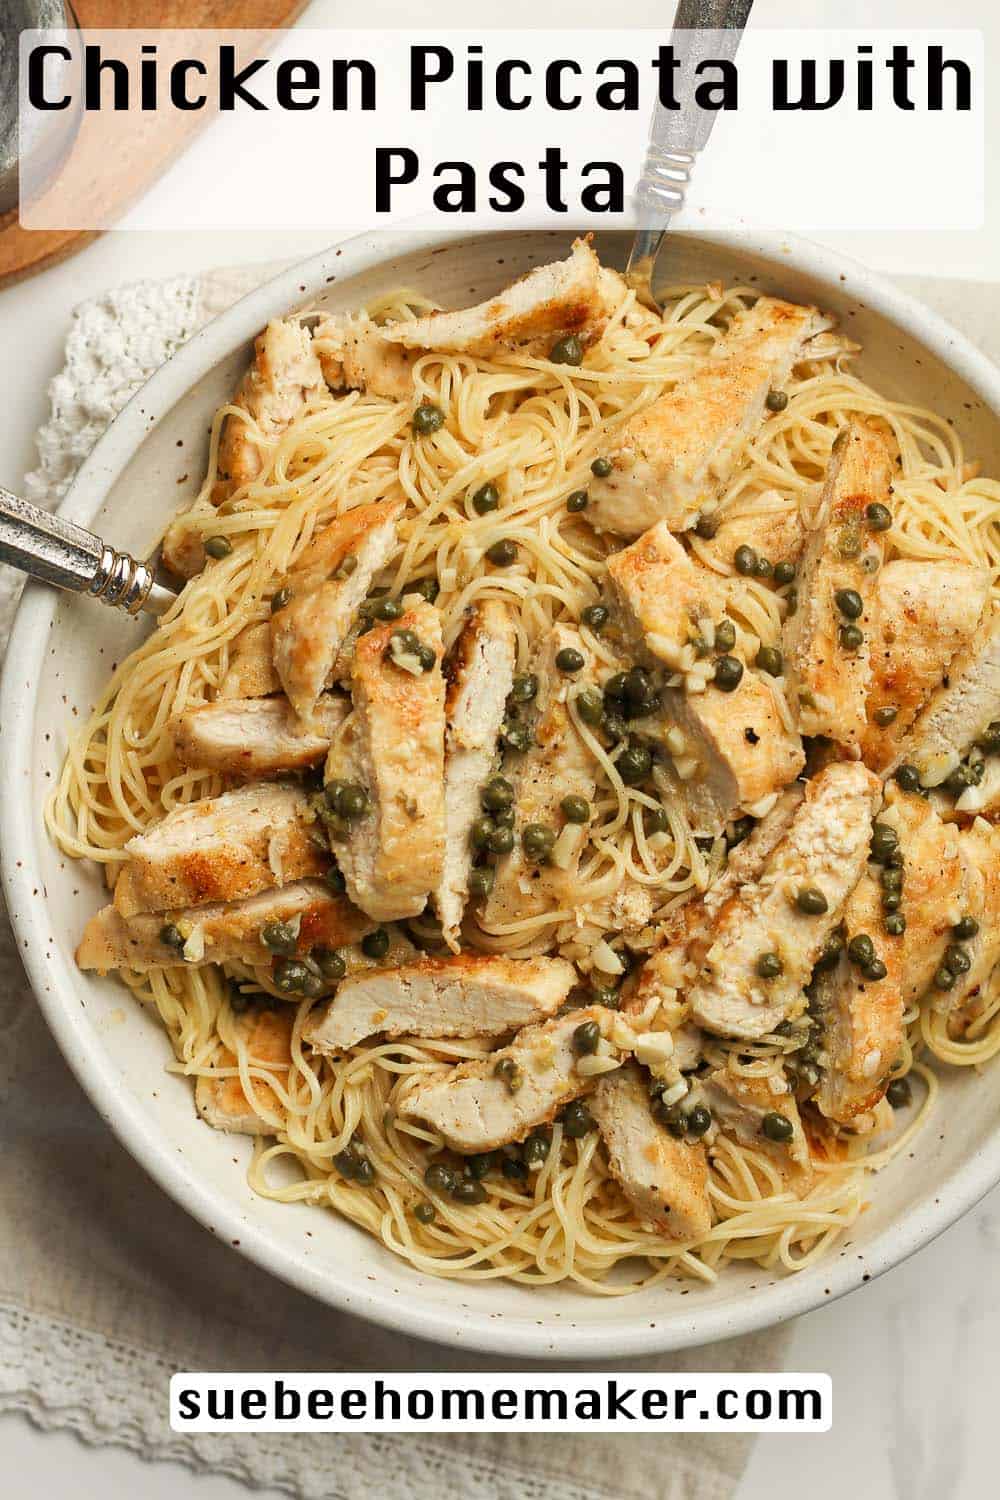 A bowl of pasta with chicken piccata.